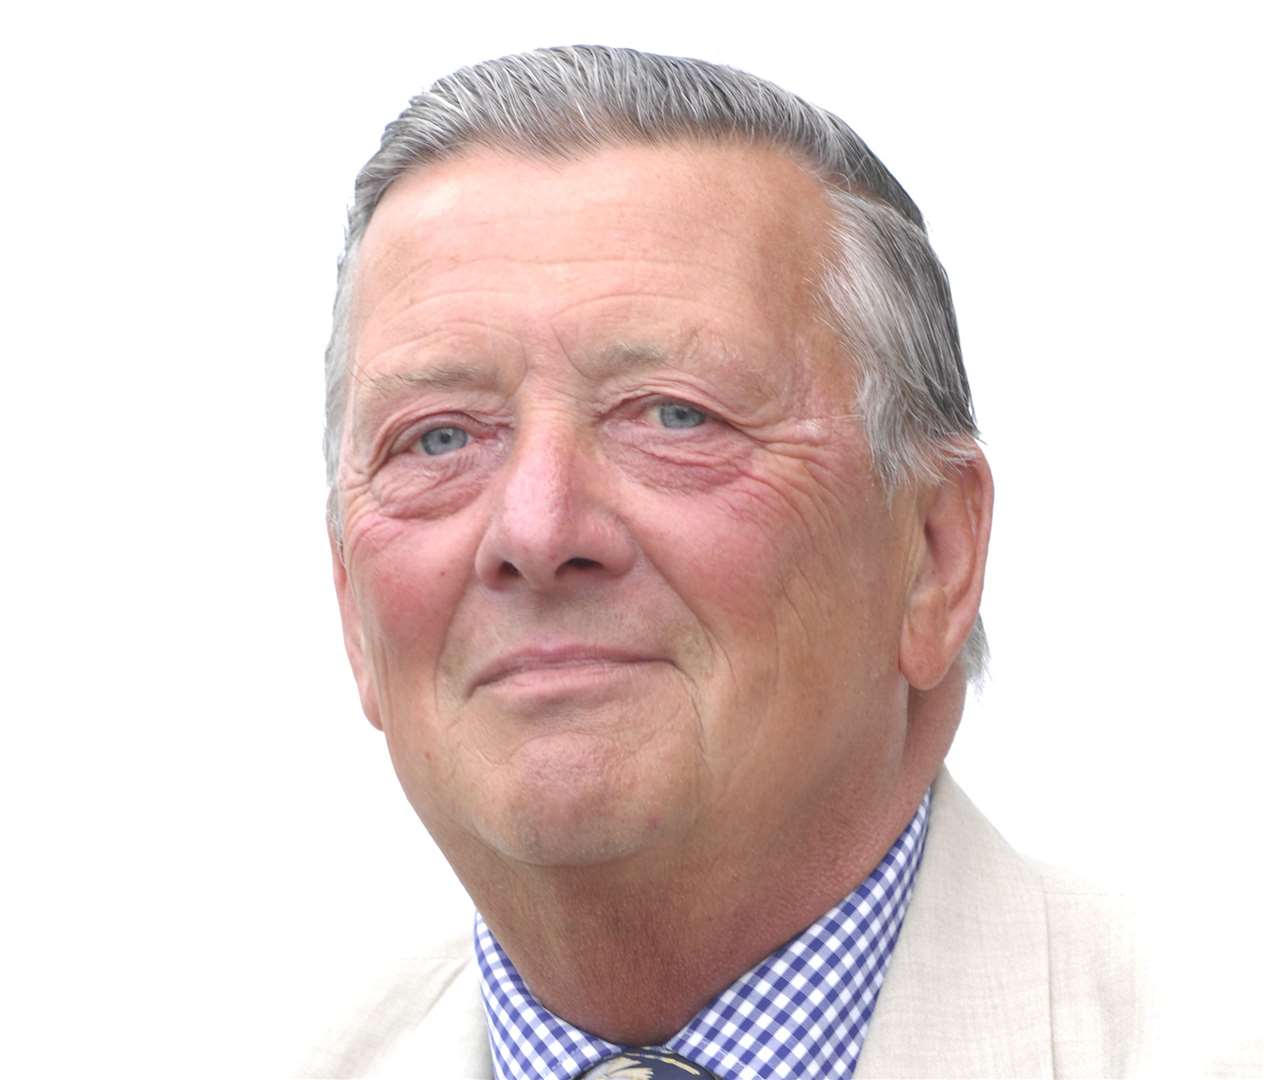 Mr Bennett became a councillor in 2011; he lost his seat eight years later